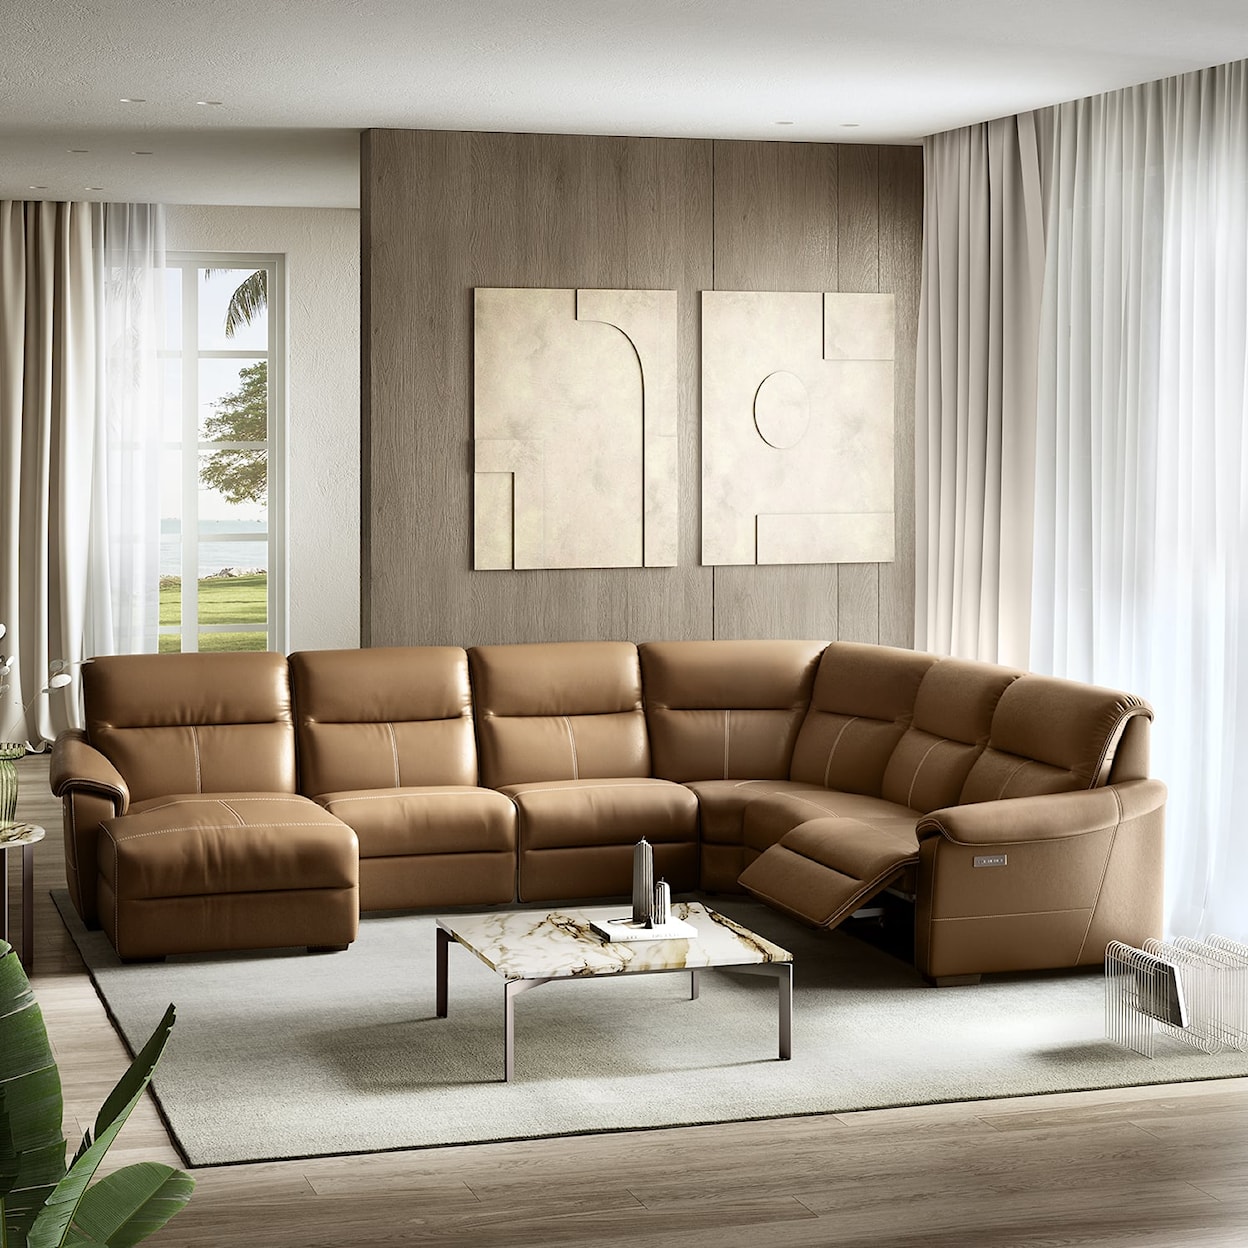 Natuzzi Editions 100% Italian Leather Potenza L-Shaped Sectional with Left Chaise